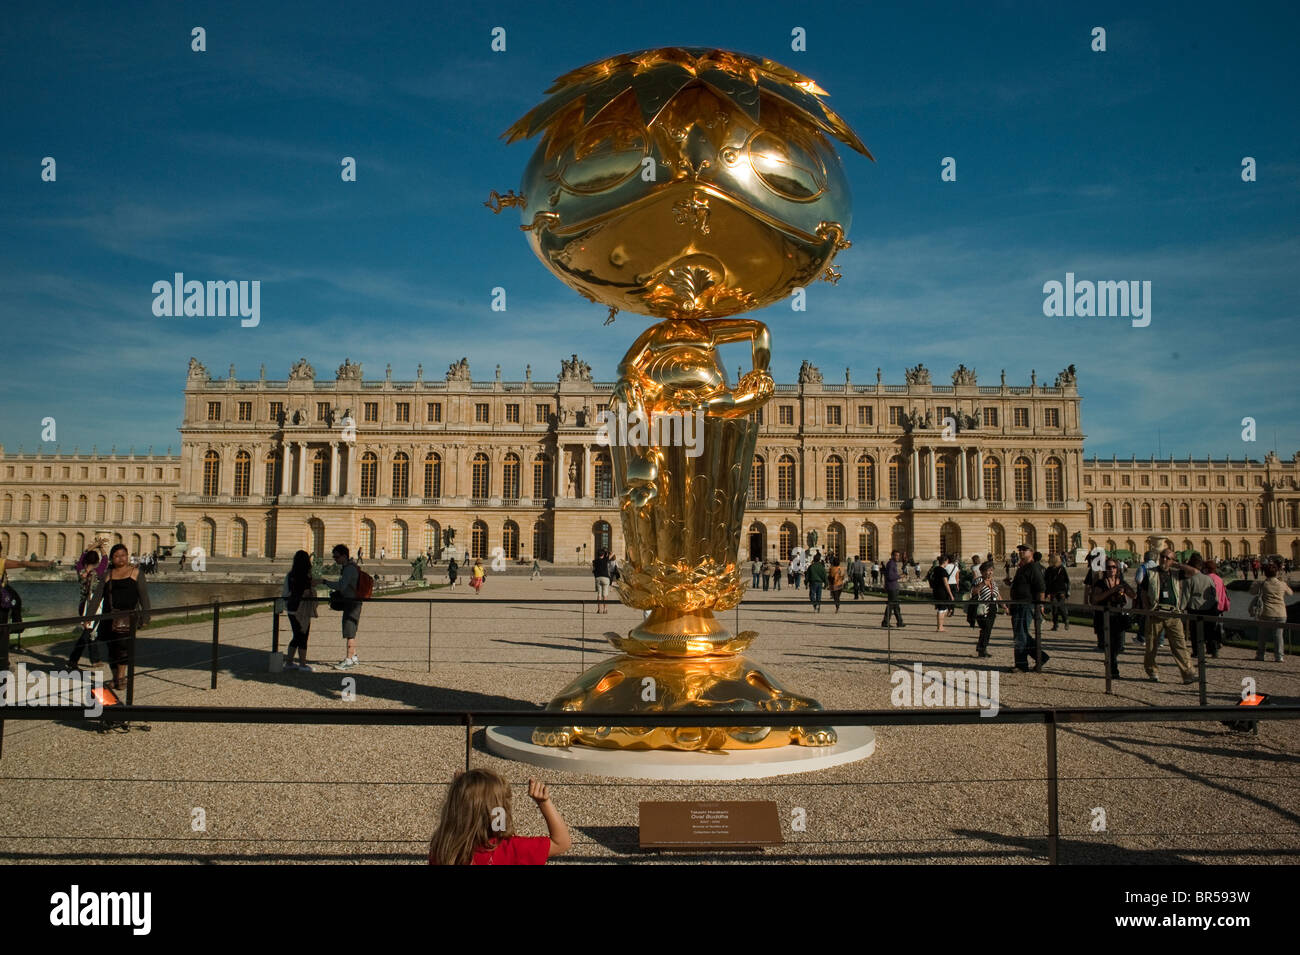 Versailles, France, Tourists Visiting Contemporary Art Show, Takashi Murakami,'Oval Buddha' in the Garden, Water parterre, sculpture museum statues, Palace of Versailles France Avant Garde, French chateau Stock Photo